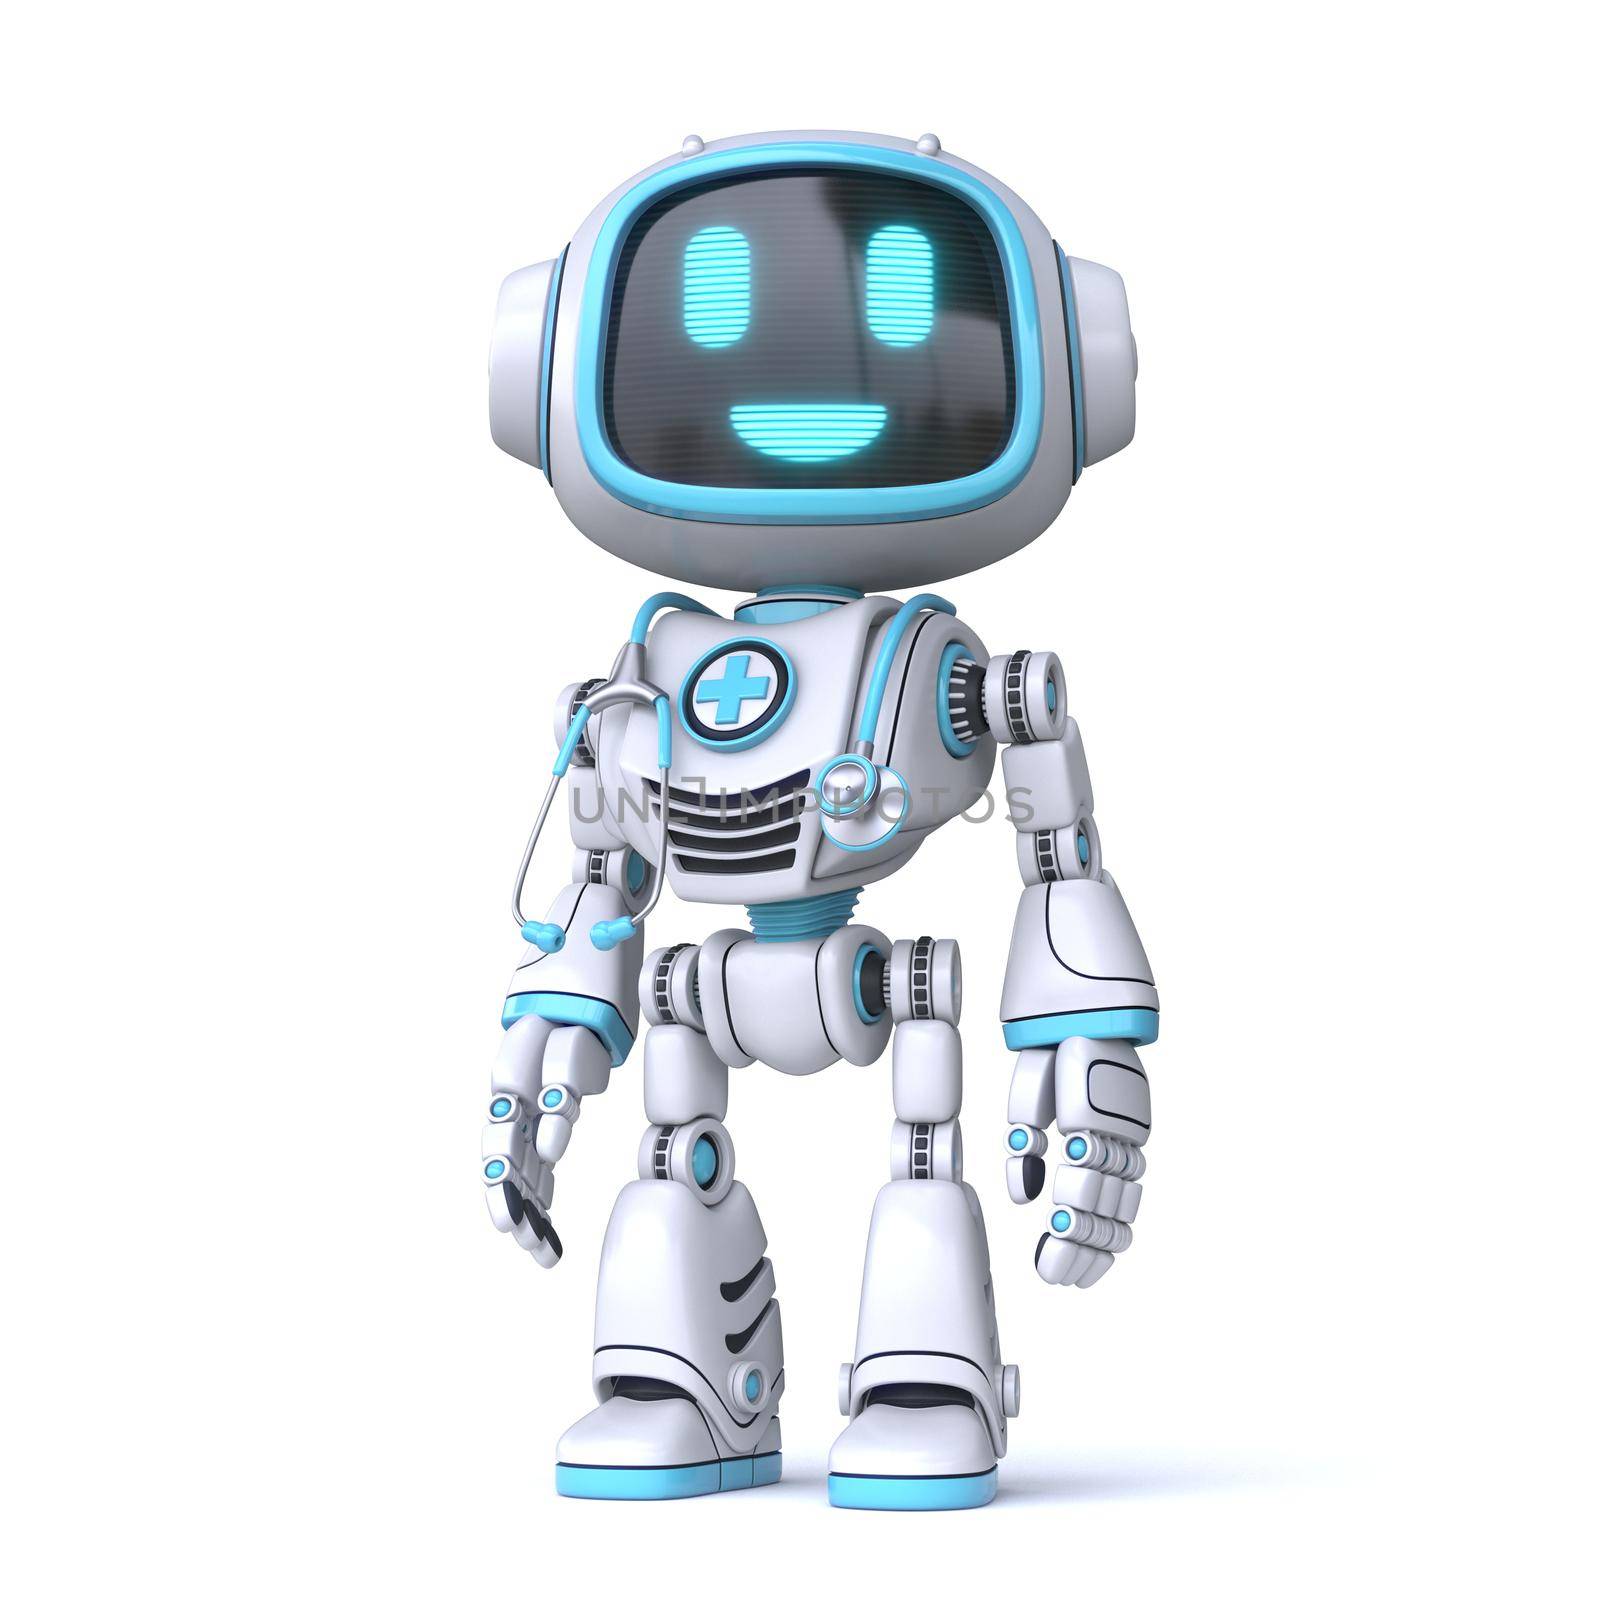 Cute blue robot doctor with stethoscope 3D rendering illustration isolated on white background